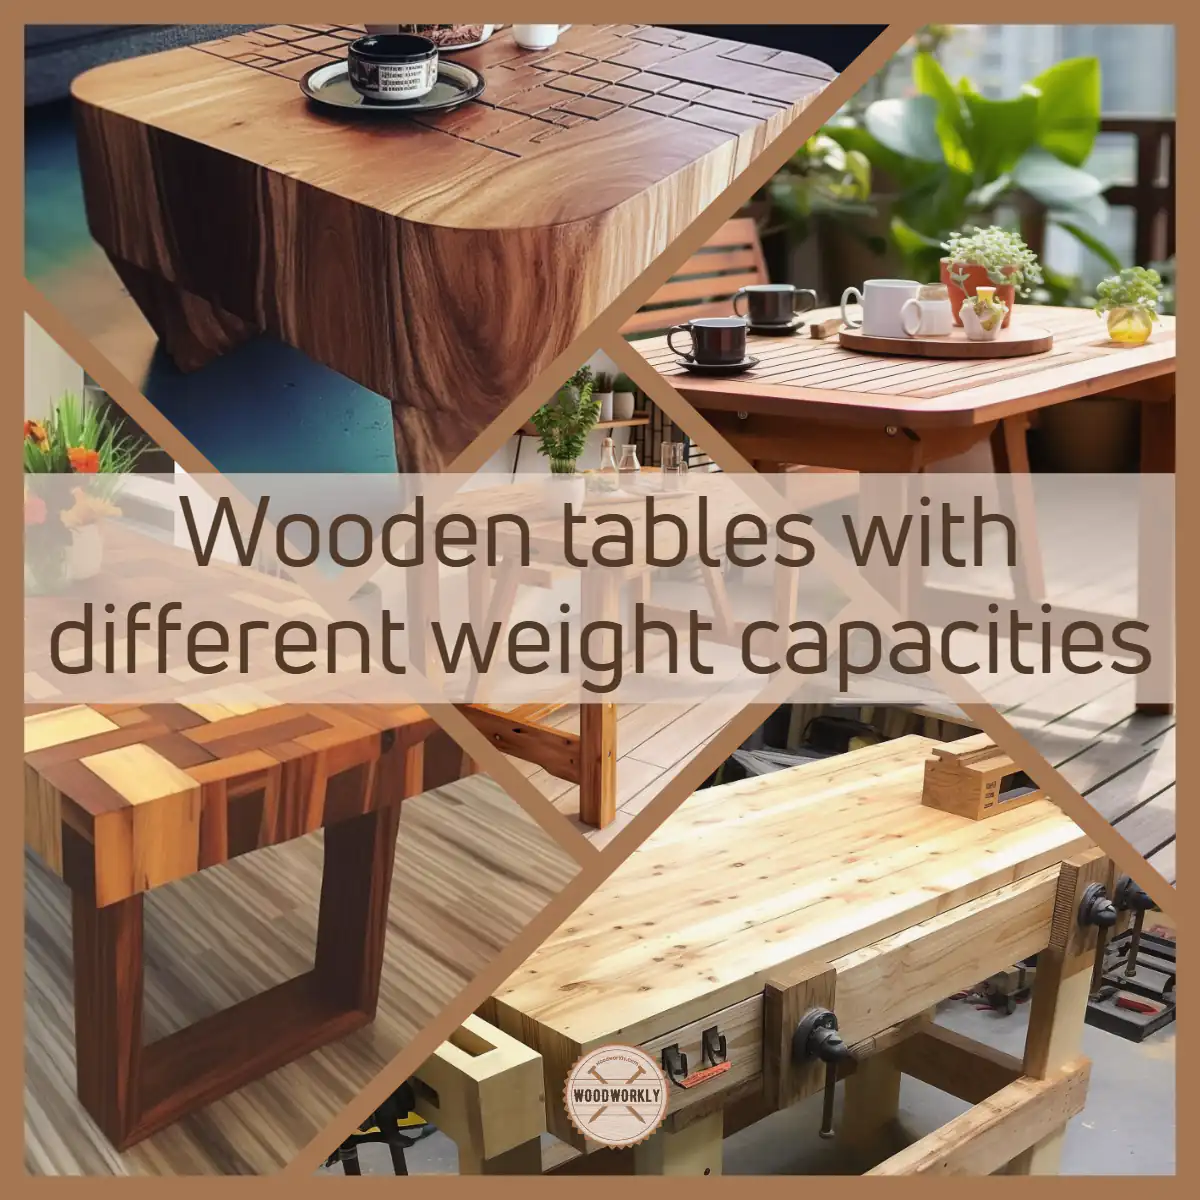 Wooden tables with different weight capacities